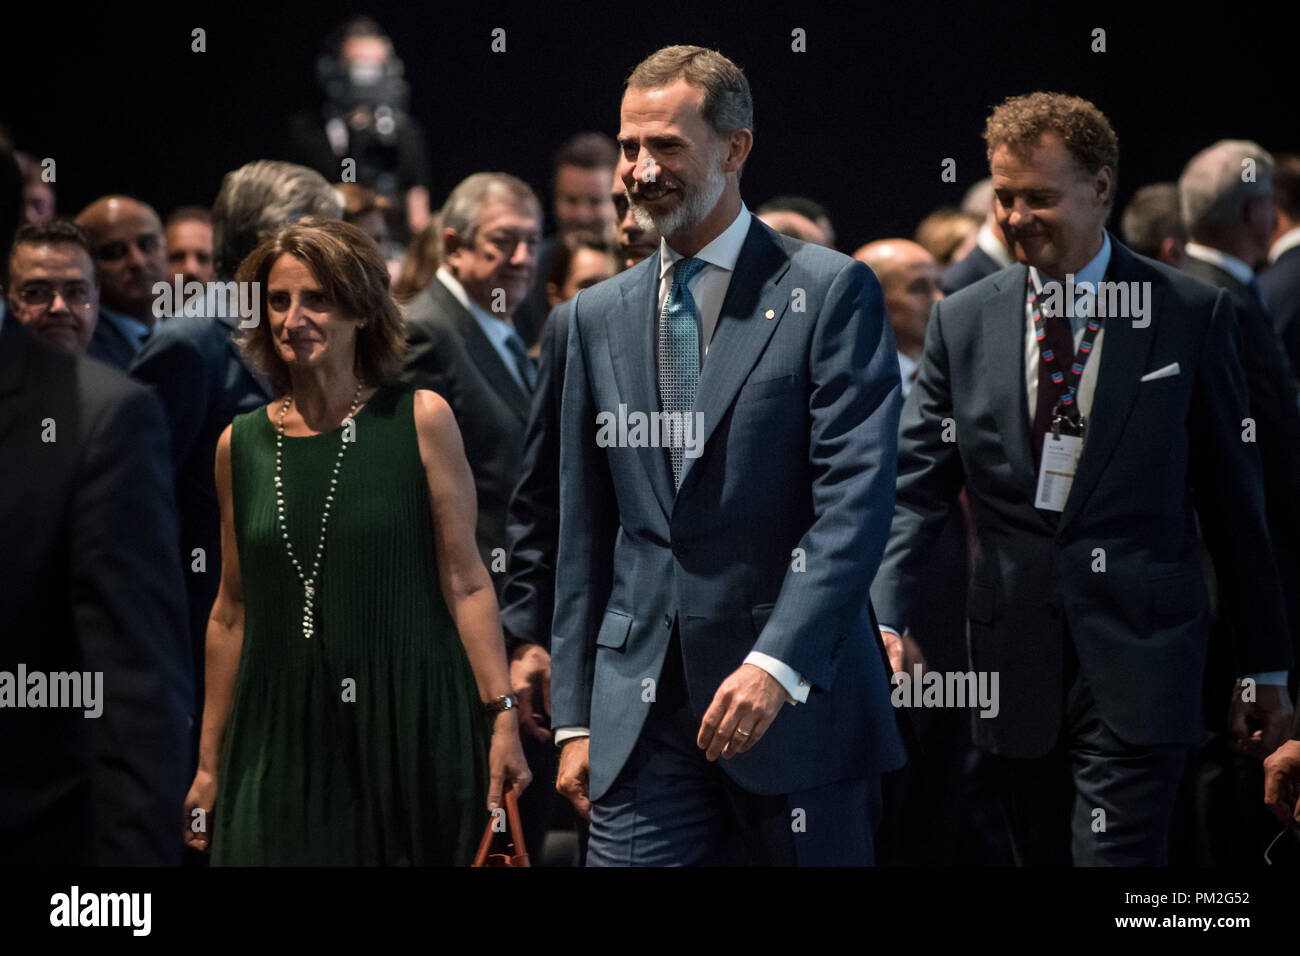 Barcelona, Catalonia, Spain. 17th Sep, 2018. Spain's King Felipe VI arrives to attend the opening ceremony at Gastech exhibition in Barcelona. Credit: Jordi Boixareu/ZUMA Wire/Alamy Live News Stock Photo